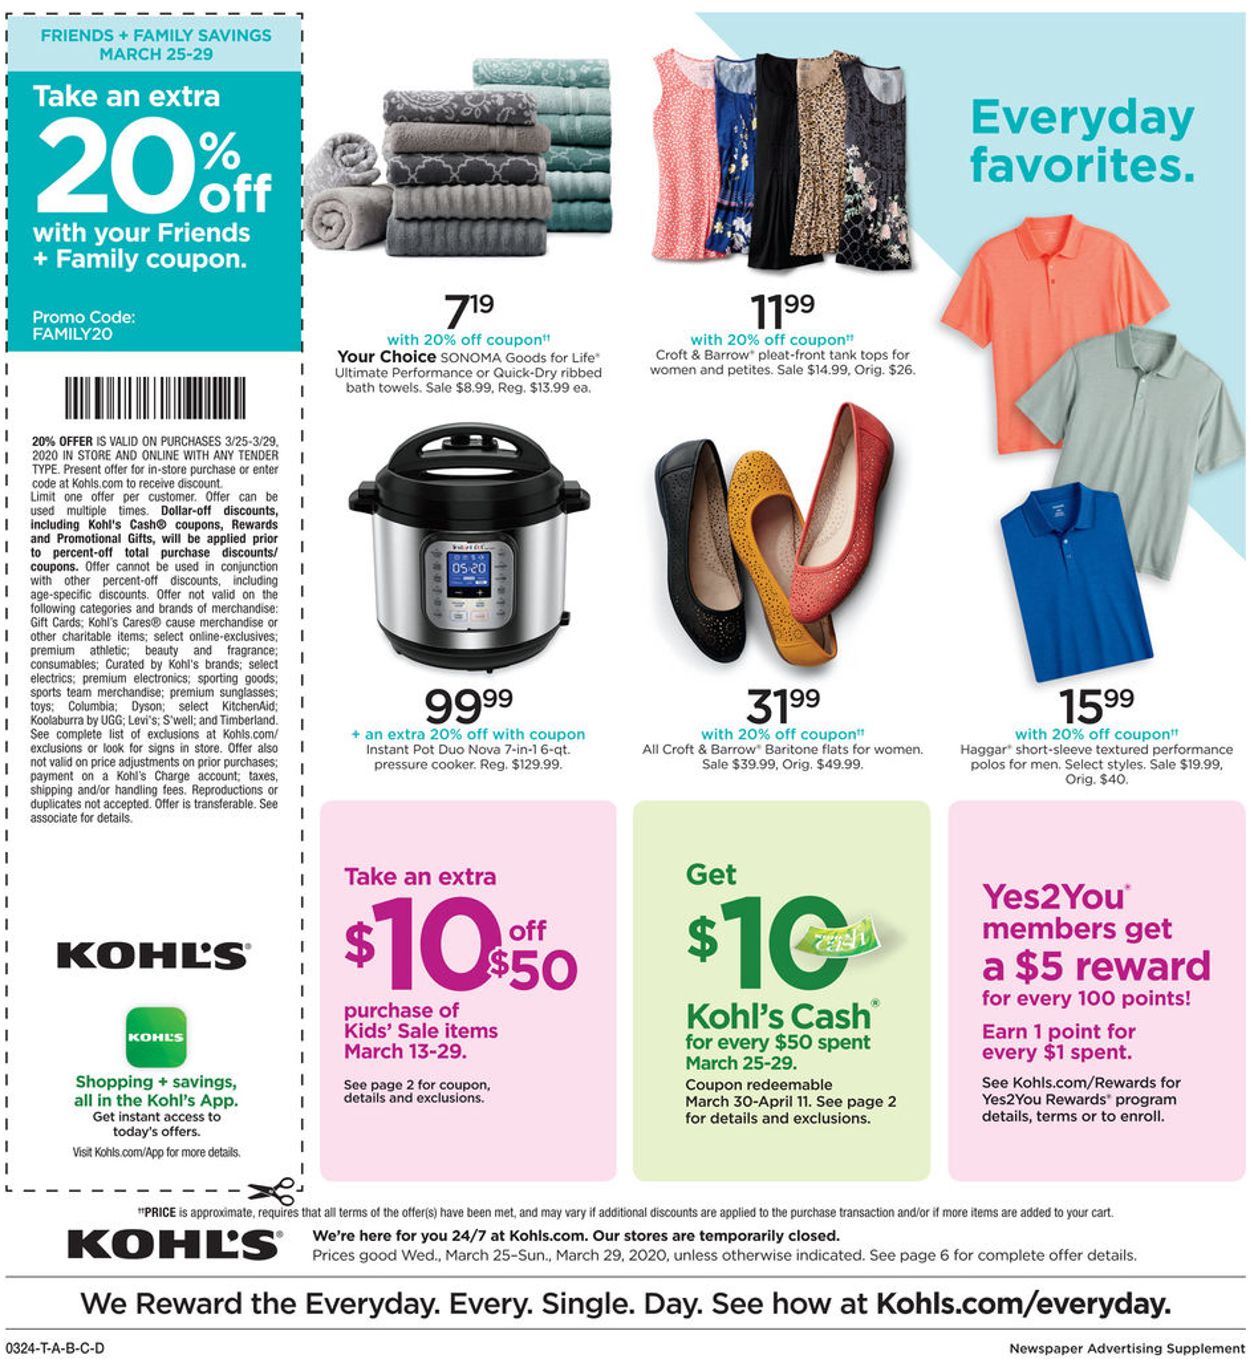 Kohl's Current weekly ad 03/25 - 03/29/2020 [8] - frequent-ads.com